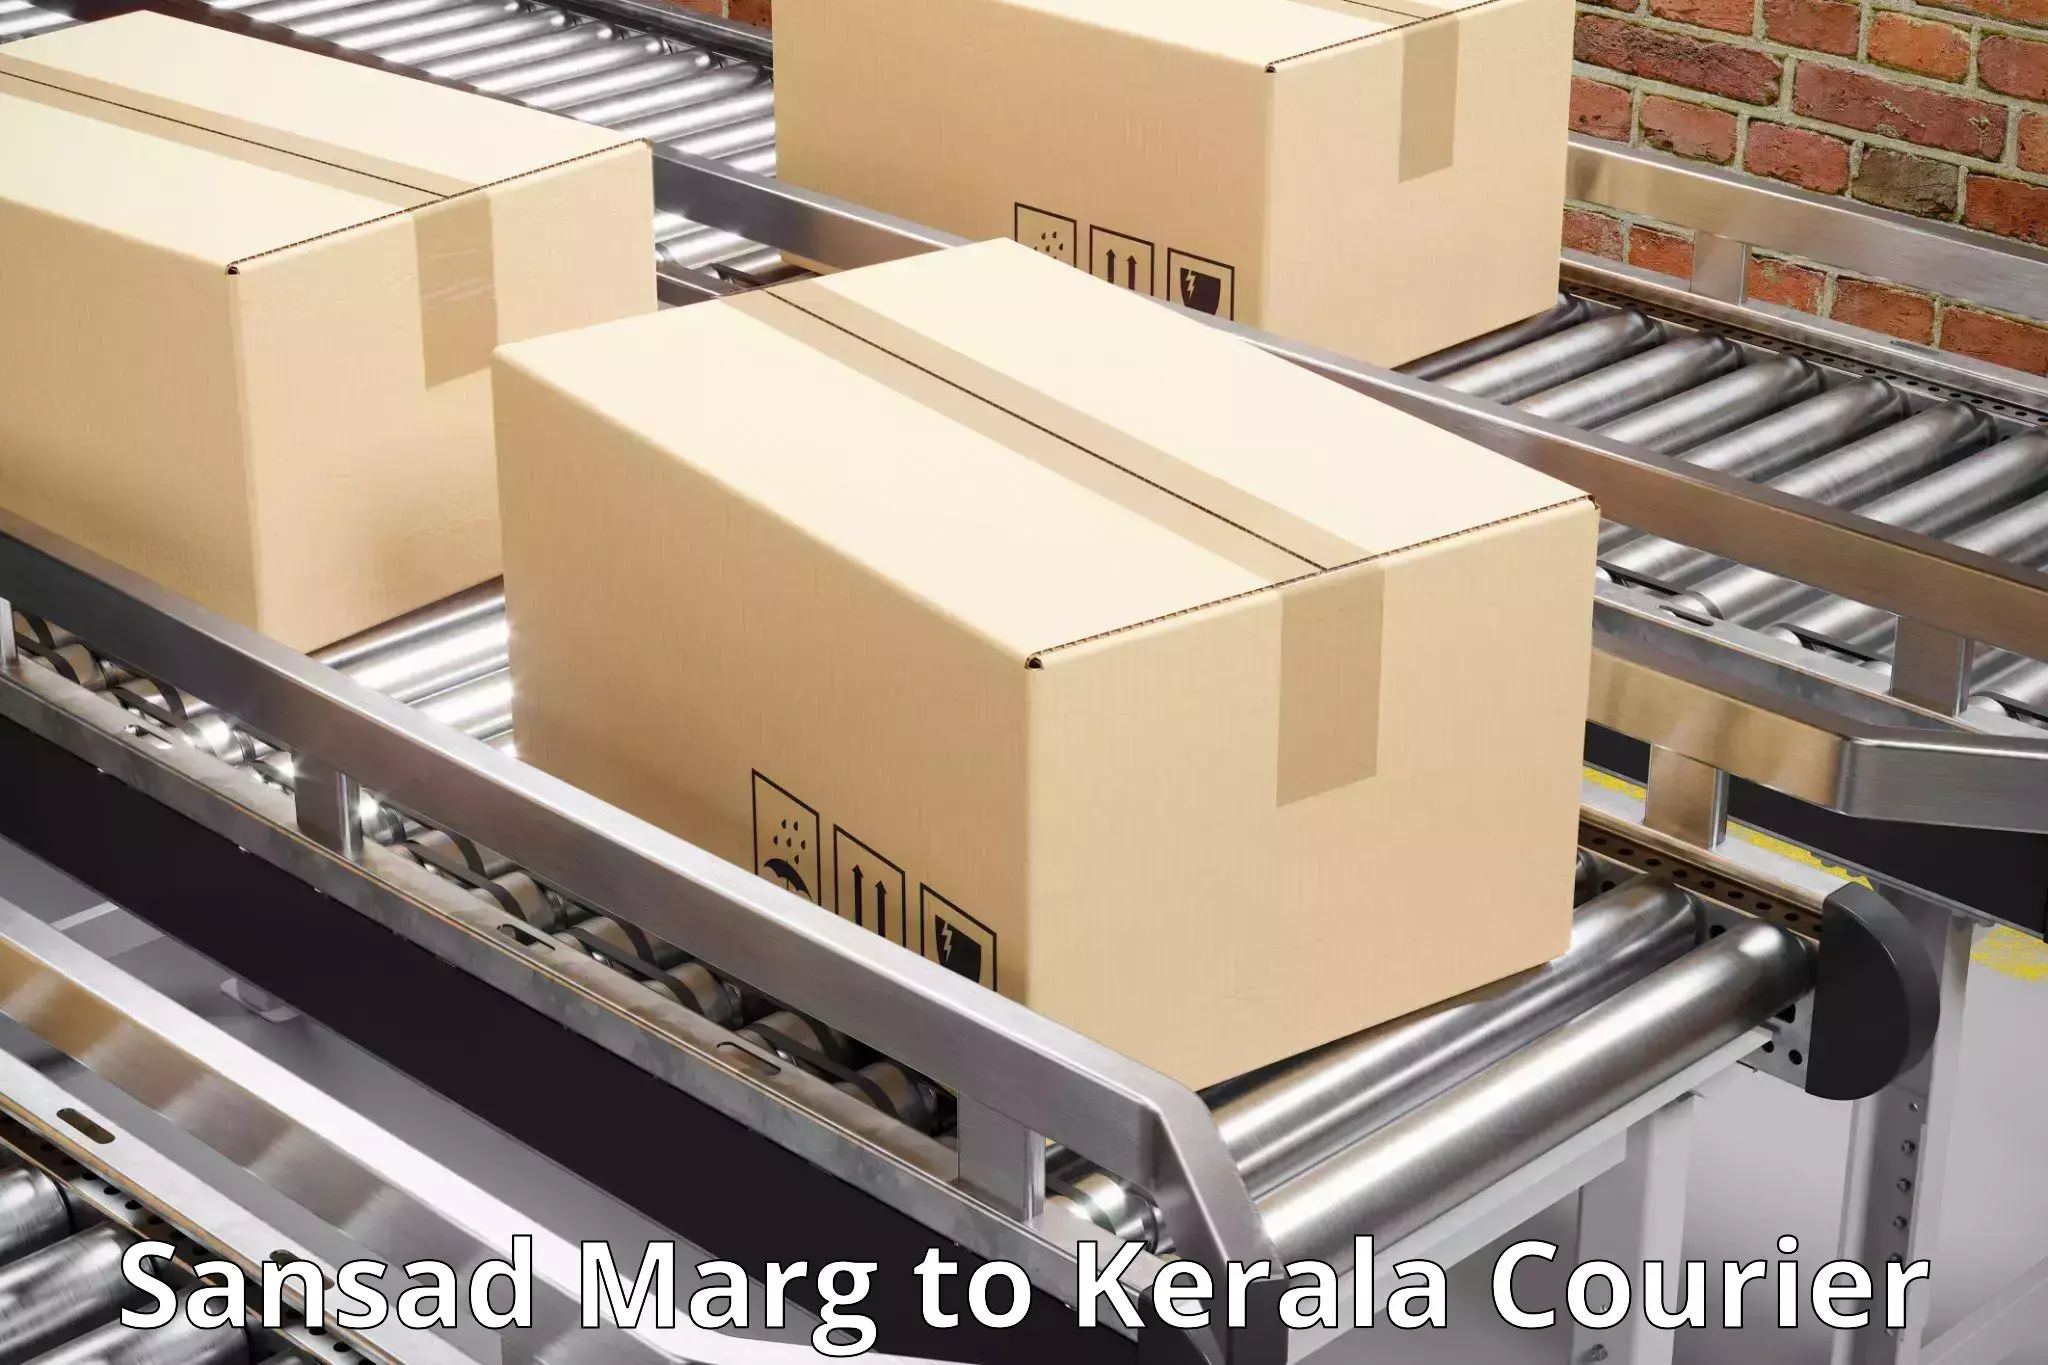 Advanced freight services Sansad Marg to Cochin University of Science and Technology